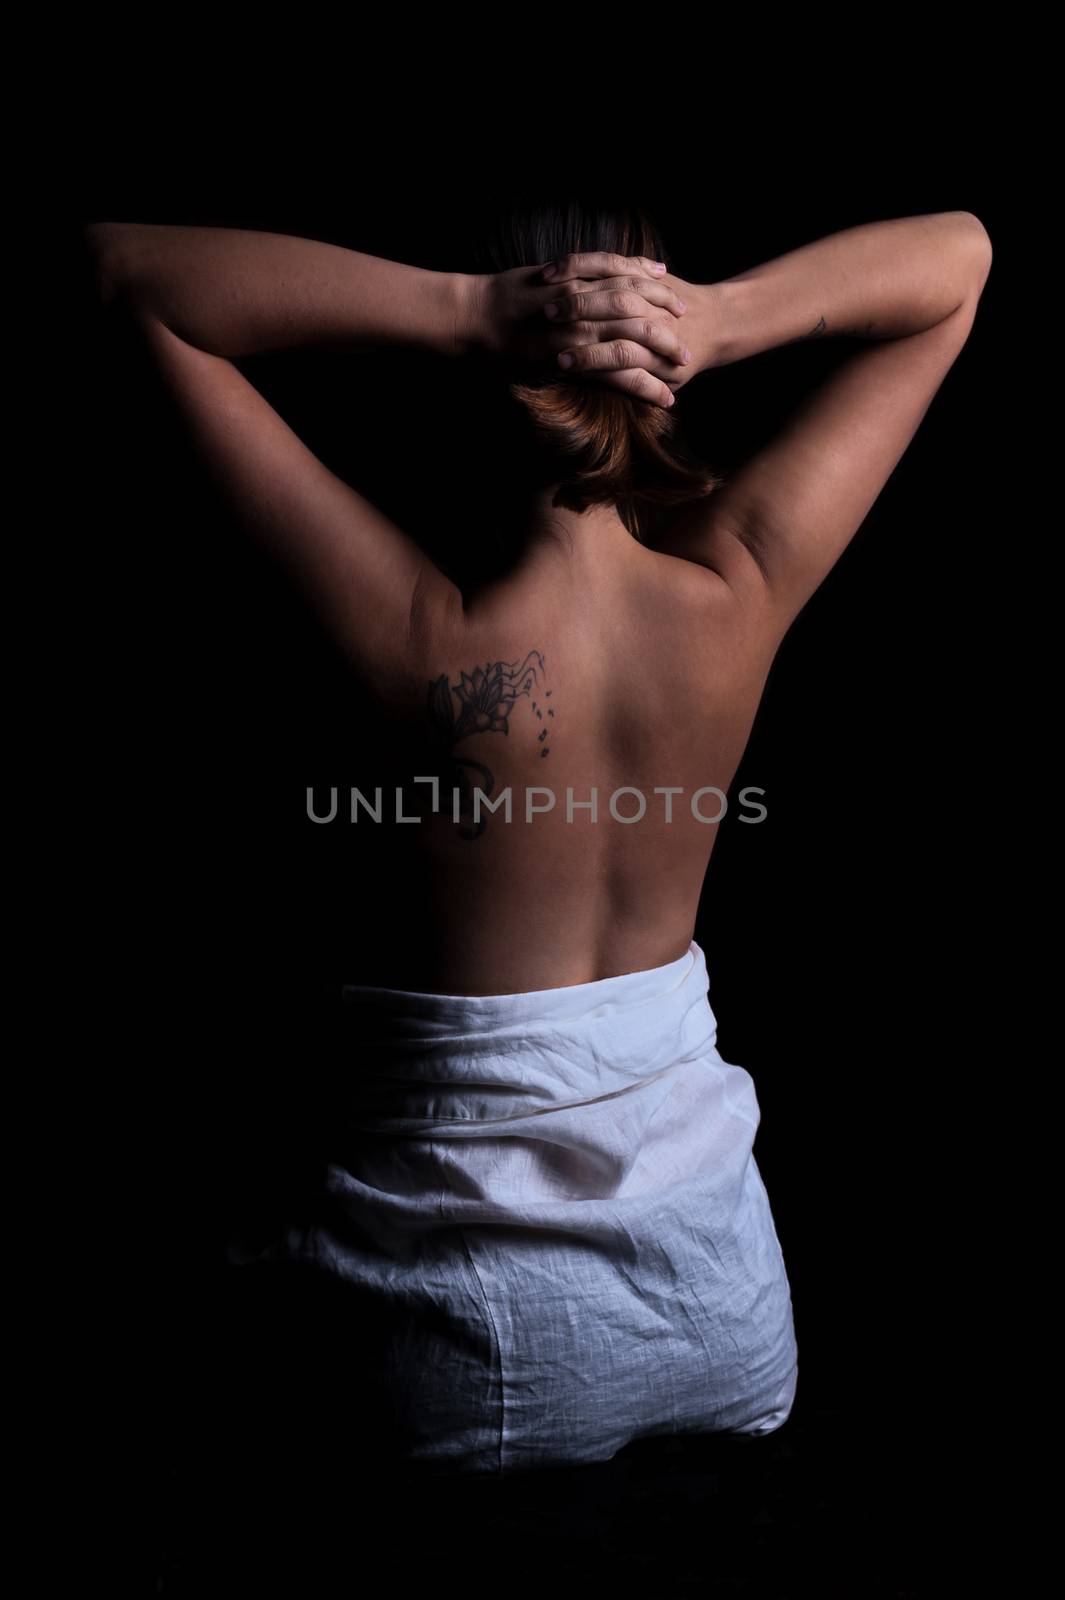 young girl with dark hair and a tattoo stands with naked back in the dark, holding her hands on her head by chernobrovin